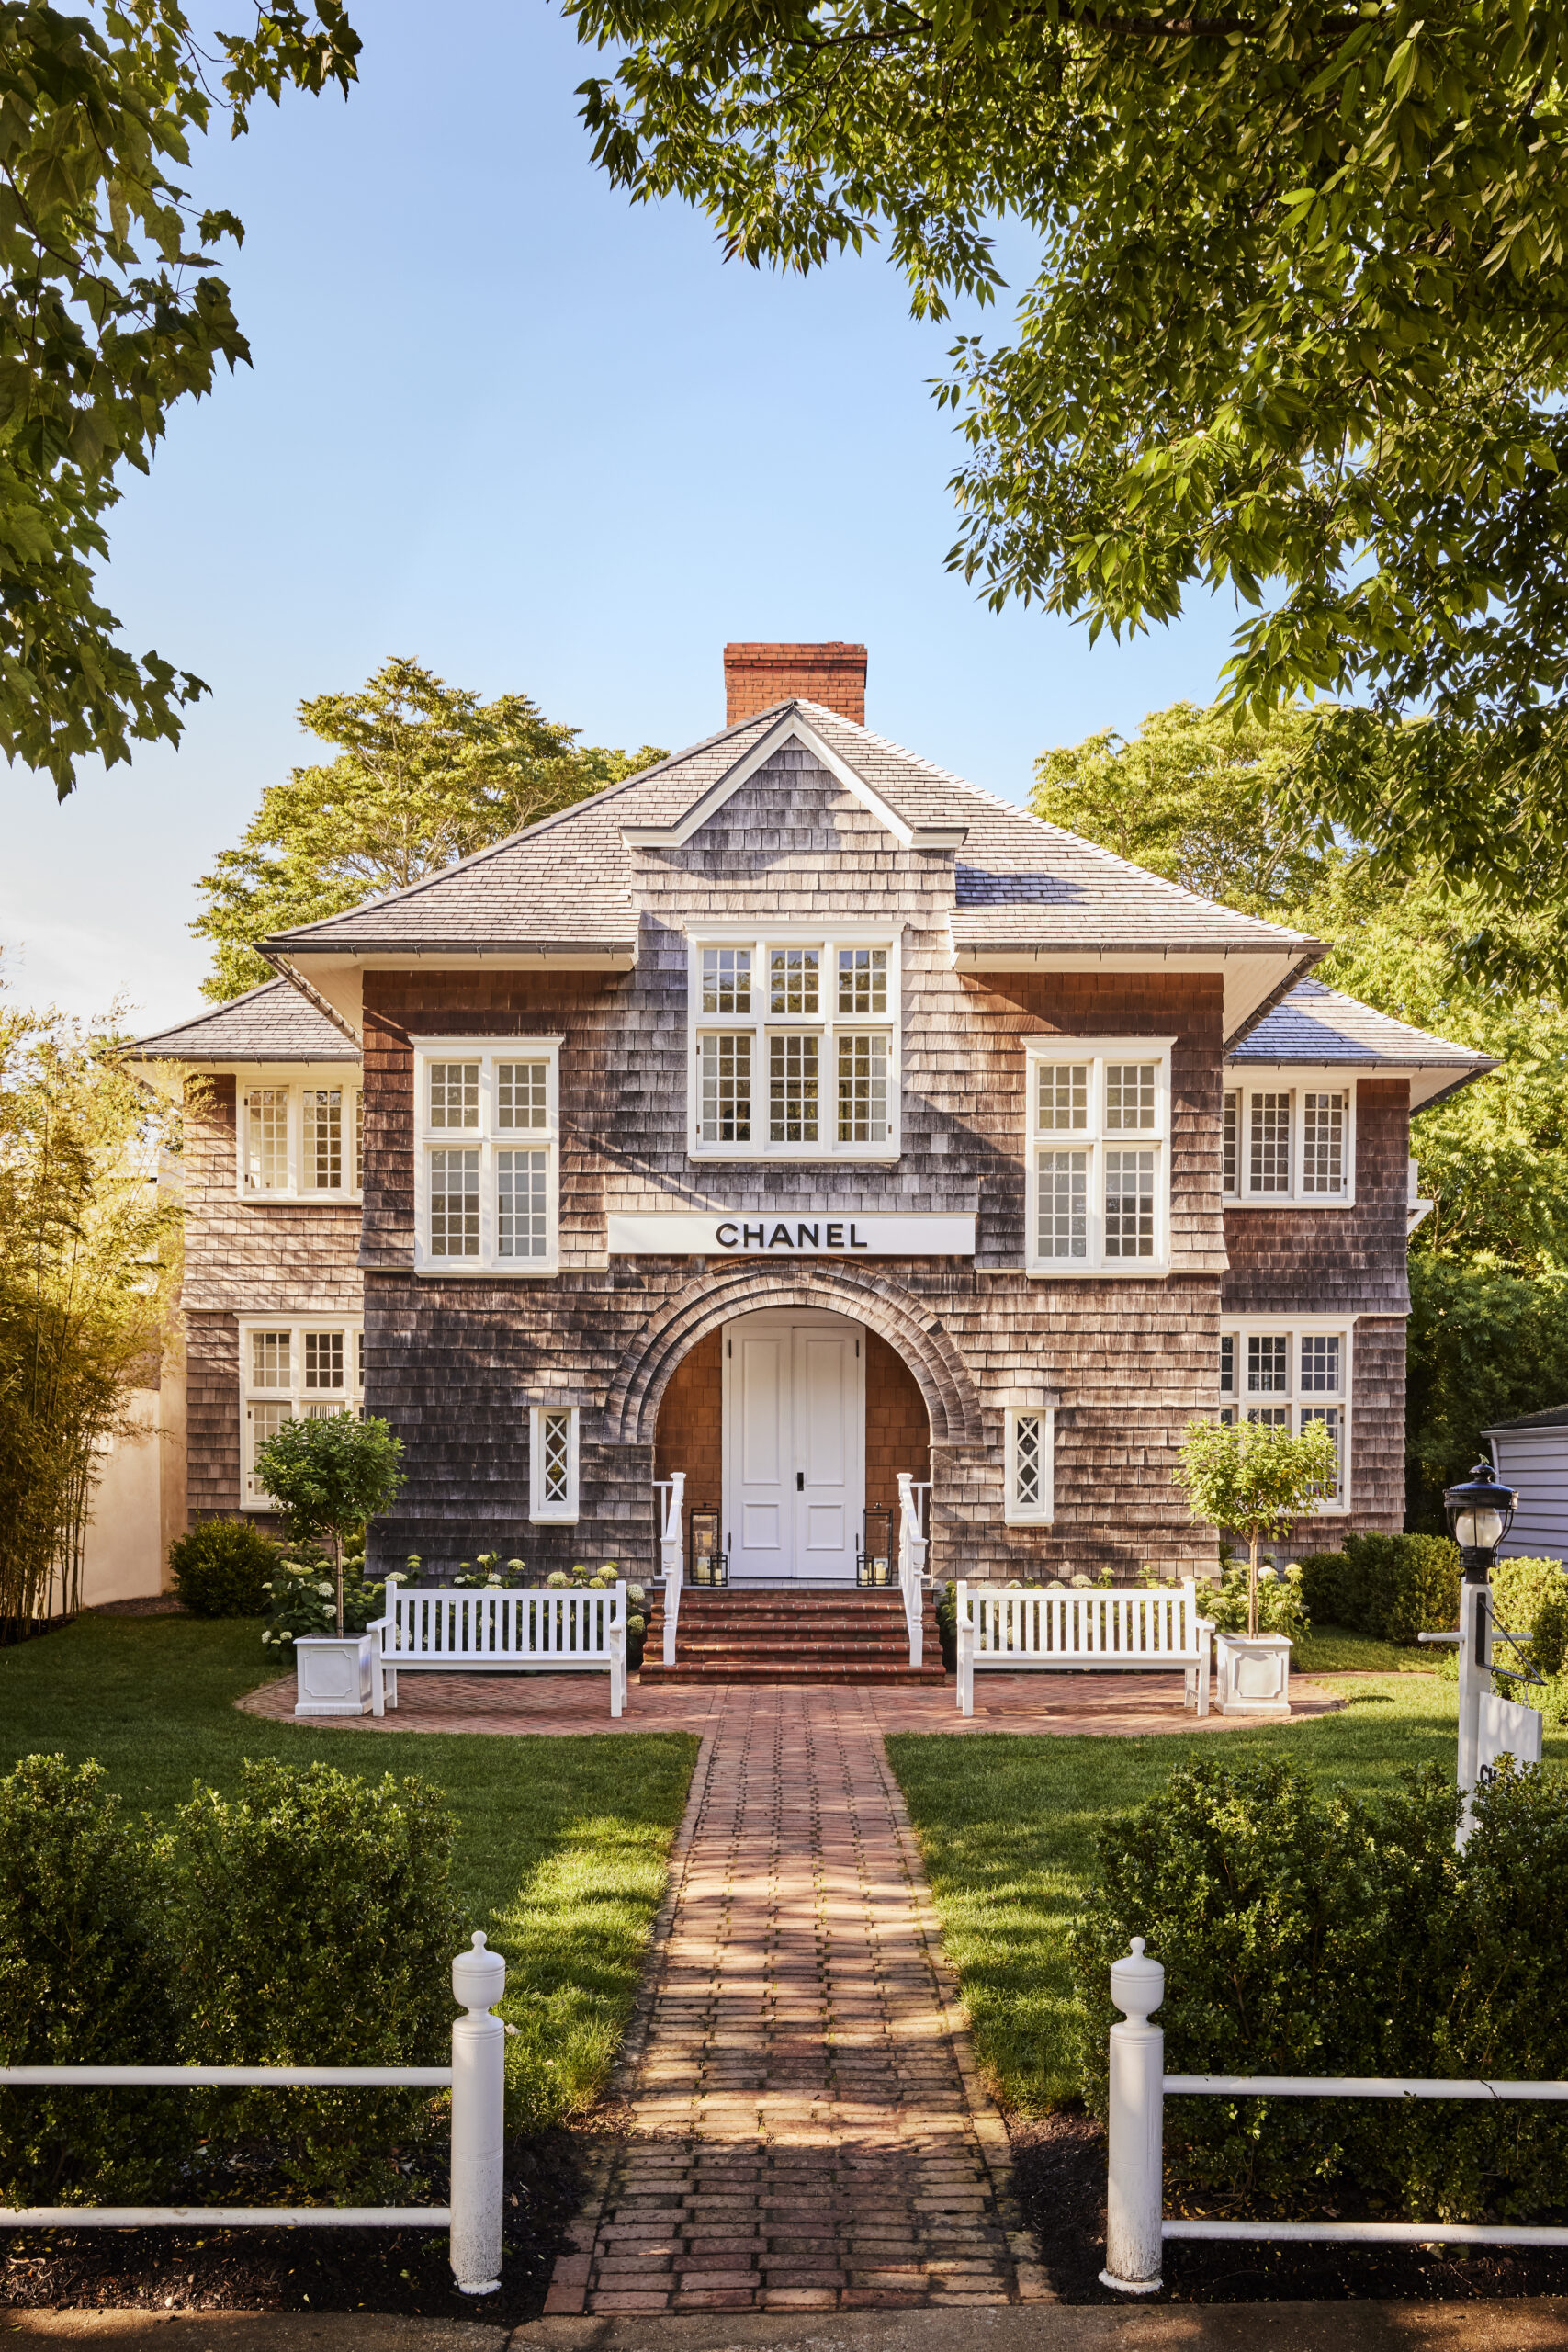 Chanel Reopens Seasonal Ephemeral Boutique in the Hamptons - V